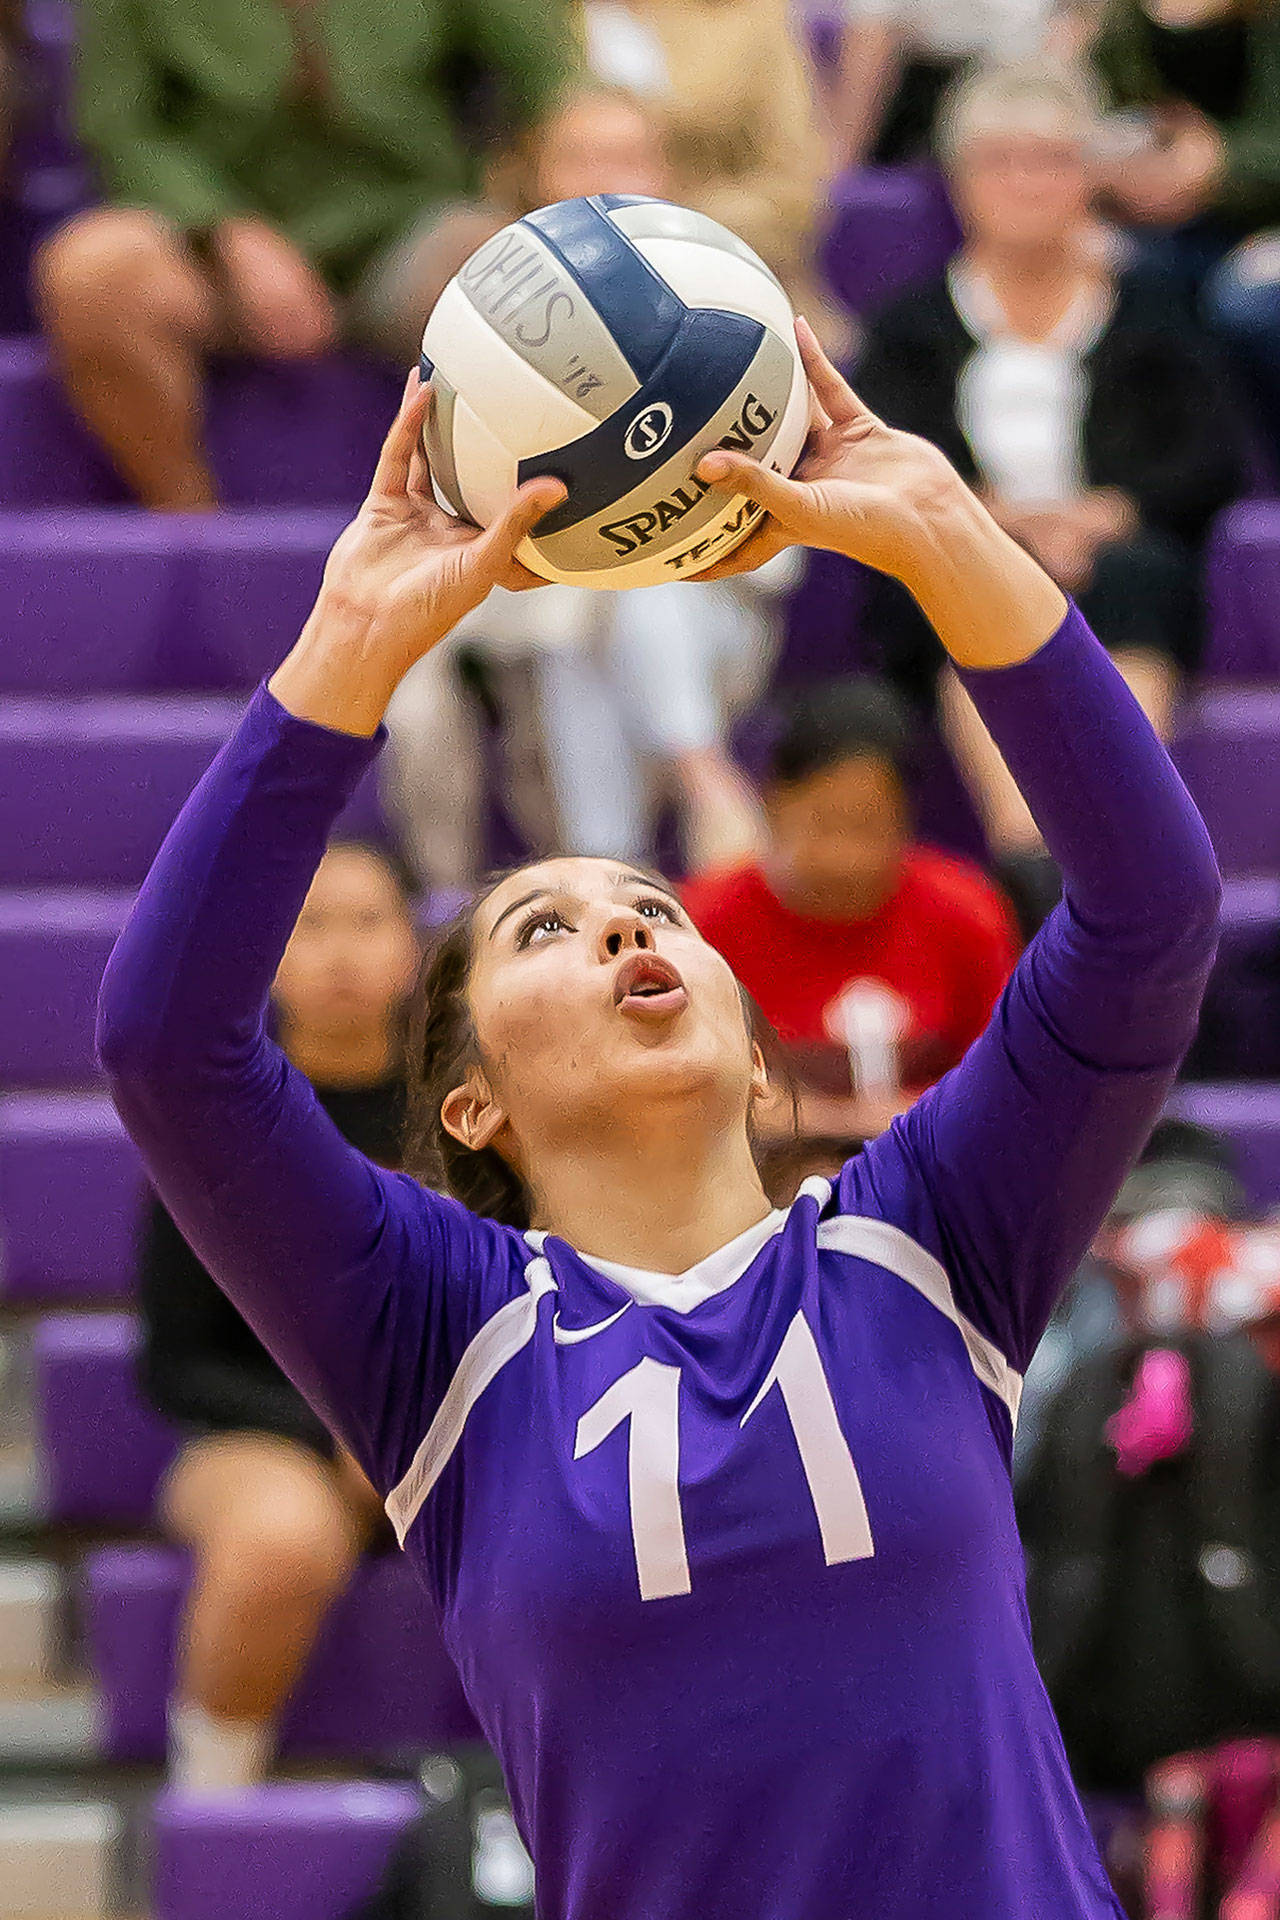 Oak Harbor senior Leah Quidachay was selected to play in the All-State Volleyball Series.(Photo by John Fisken)